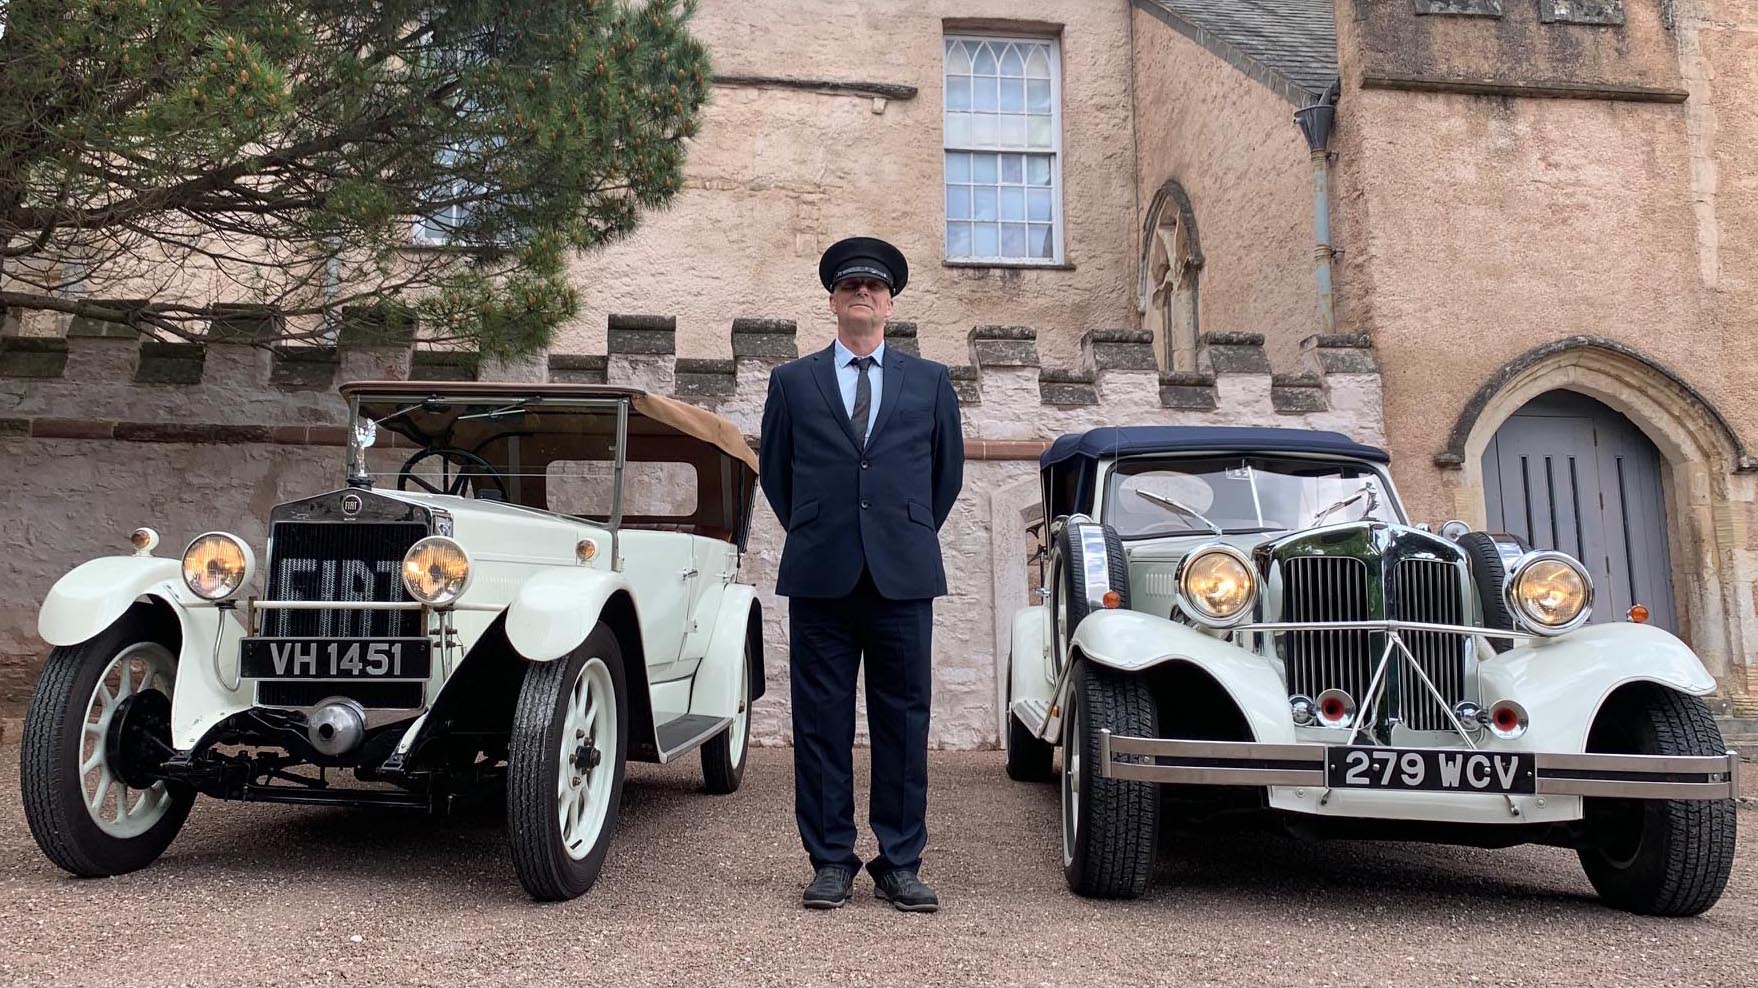 Fully uniformed chauffeur with hat standing in the middle of two white vintage cars.